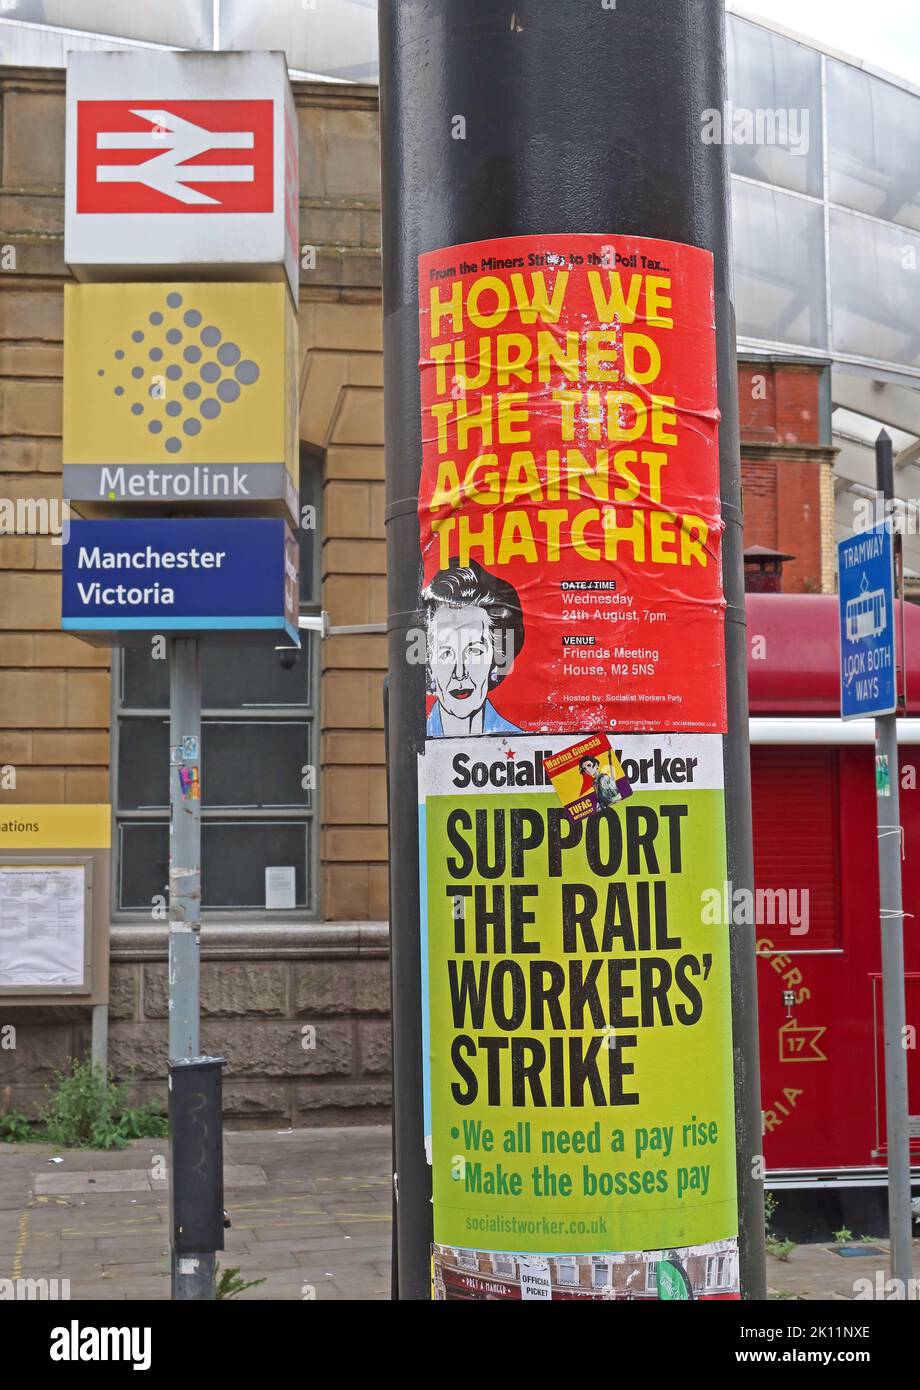 Victoria Station,Manchester, posters, Support The rail Workers Strike, How we turned the tide against, Thatcher, M3 1WY Stock Photo